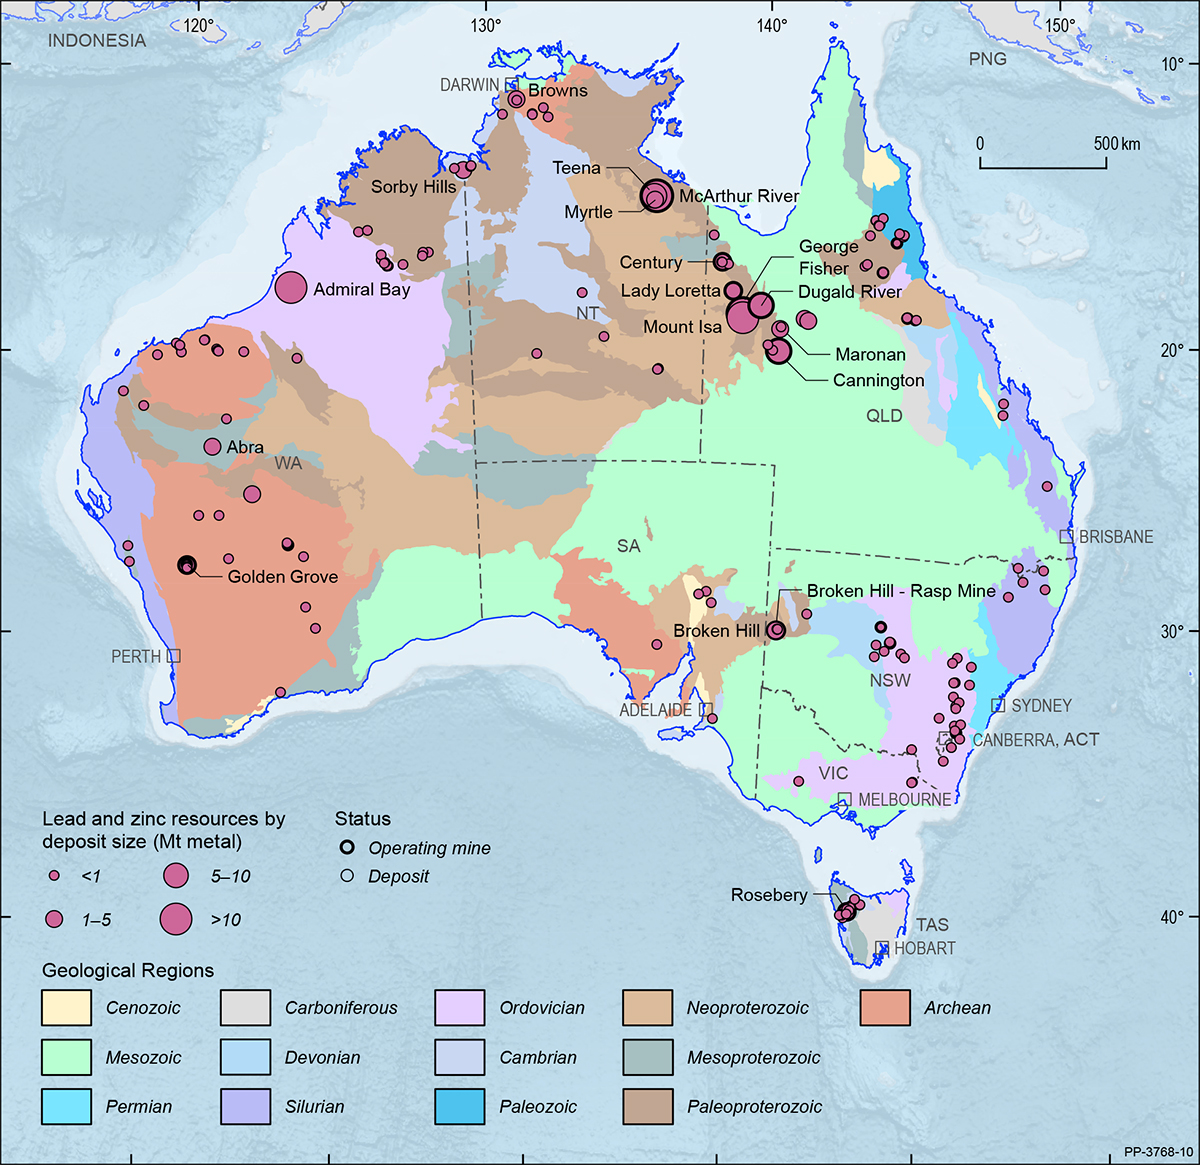 A map showing the Australian continent shaded by the ages of the main geological provinces highlighting the geographical distribution of Australian lead and zinc deposits and operating mines in 2019.